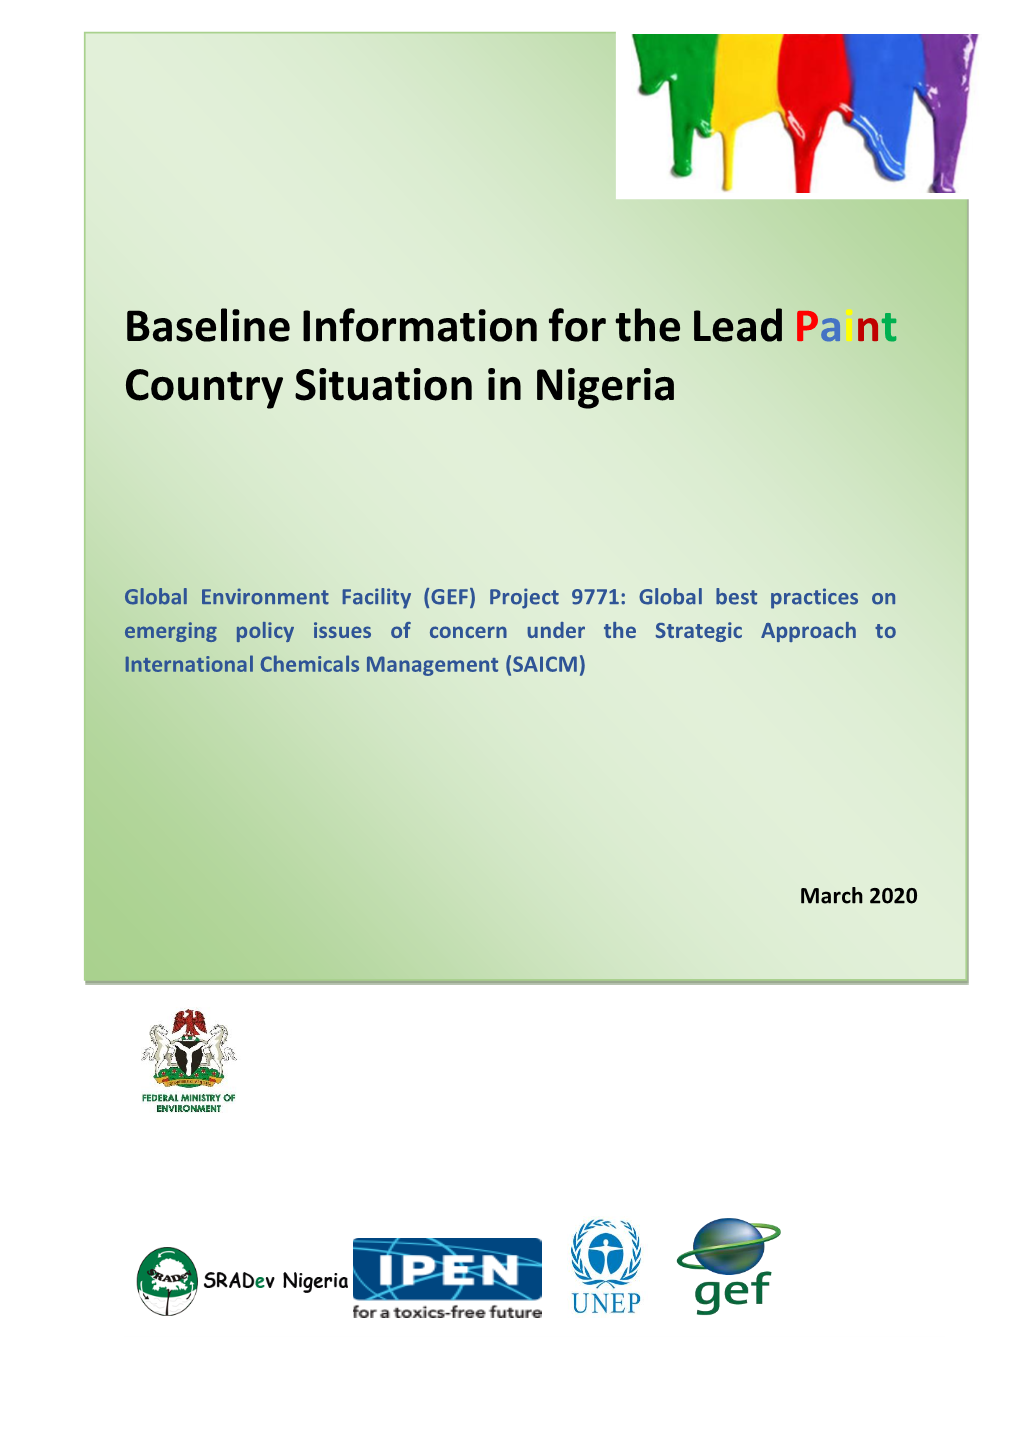 Baseline Information for the Lead Paint Country Situation in Nigeria